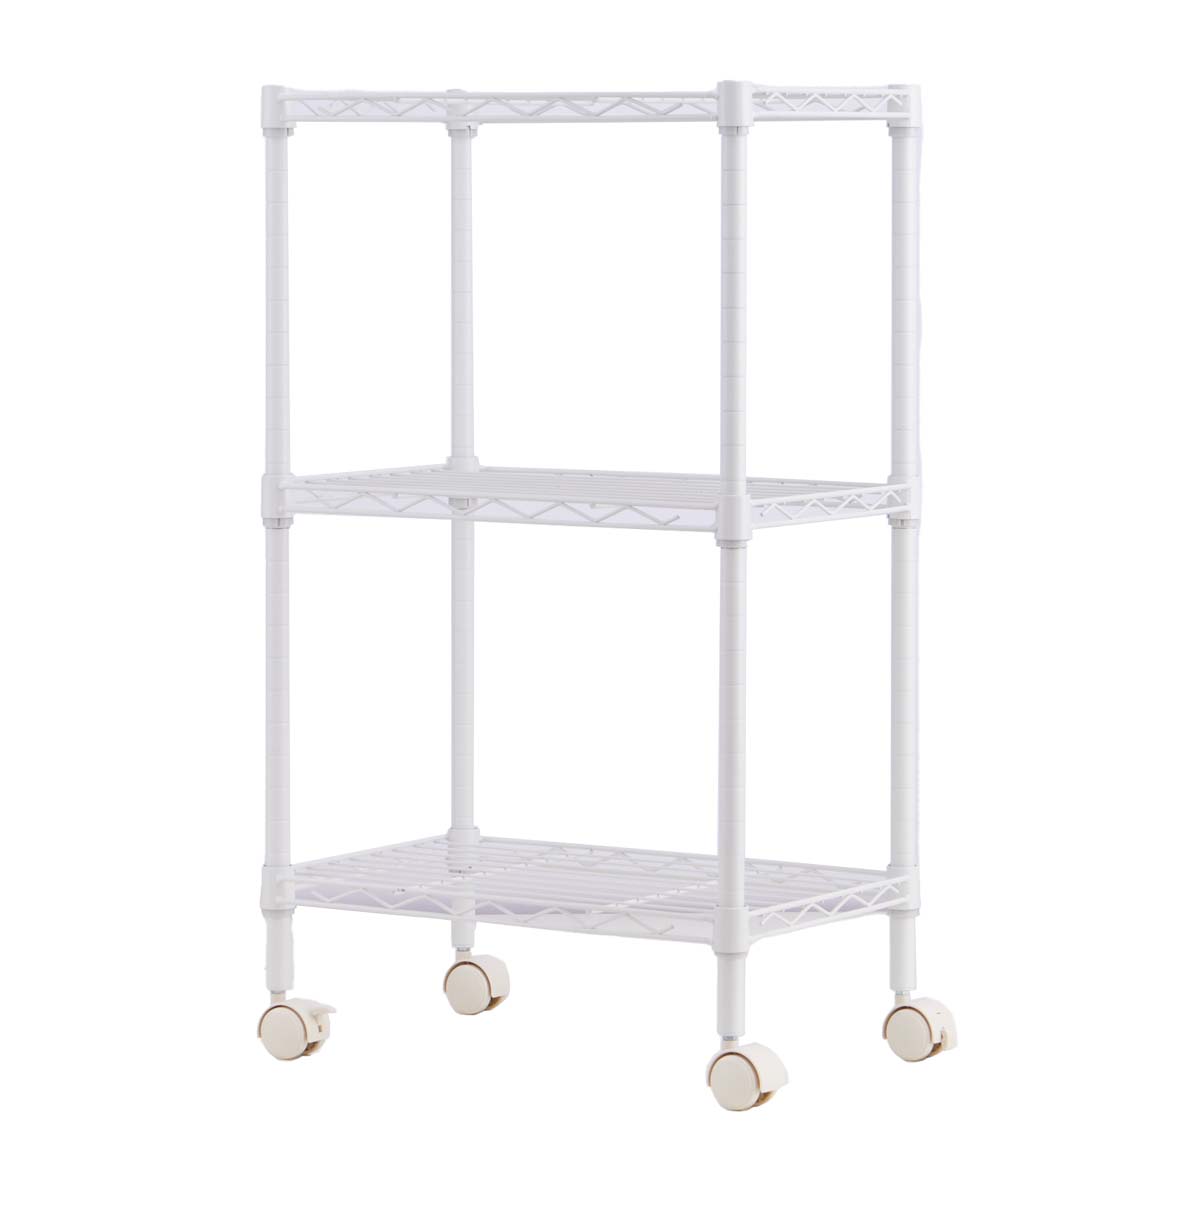 3 tier wire shelving unit Manufacturing